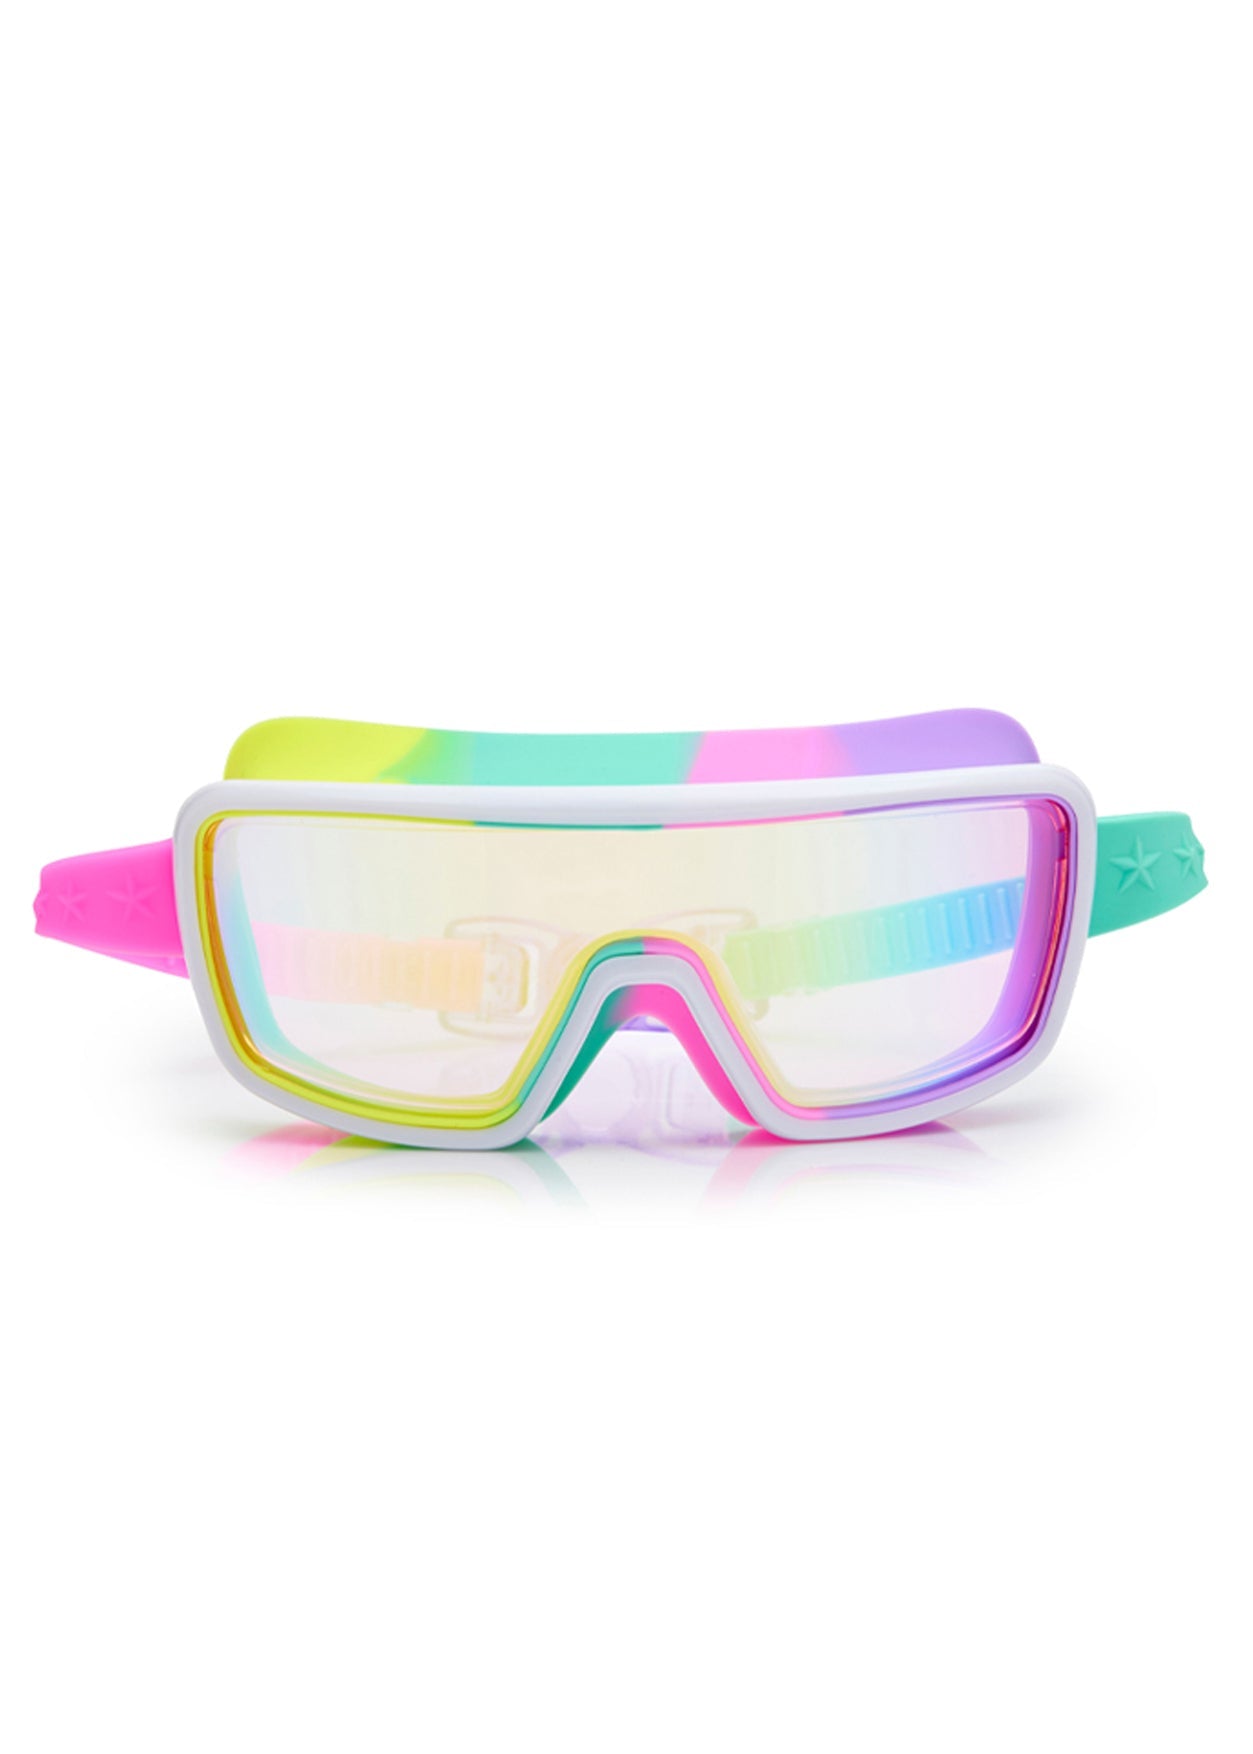 Chromatic Sours Swimming Goggles